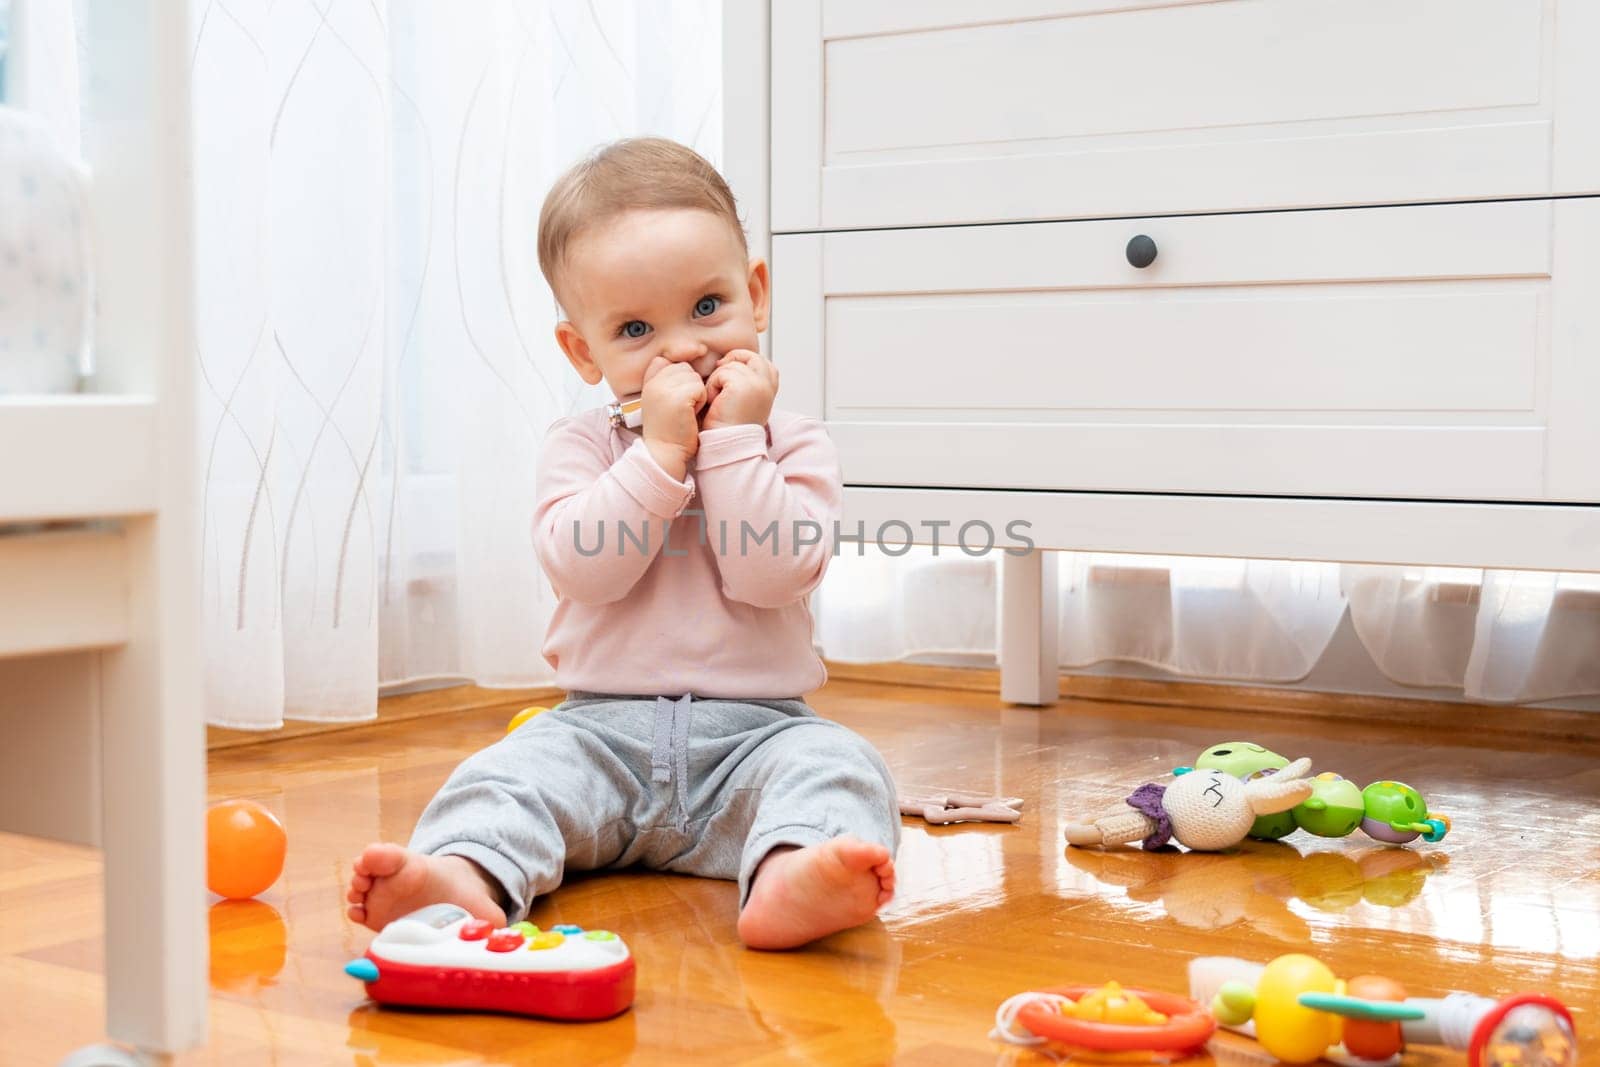 The baby hides his smile with his hands while sitting on the floor and playing with toys.